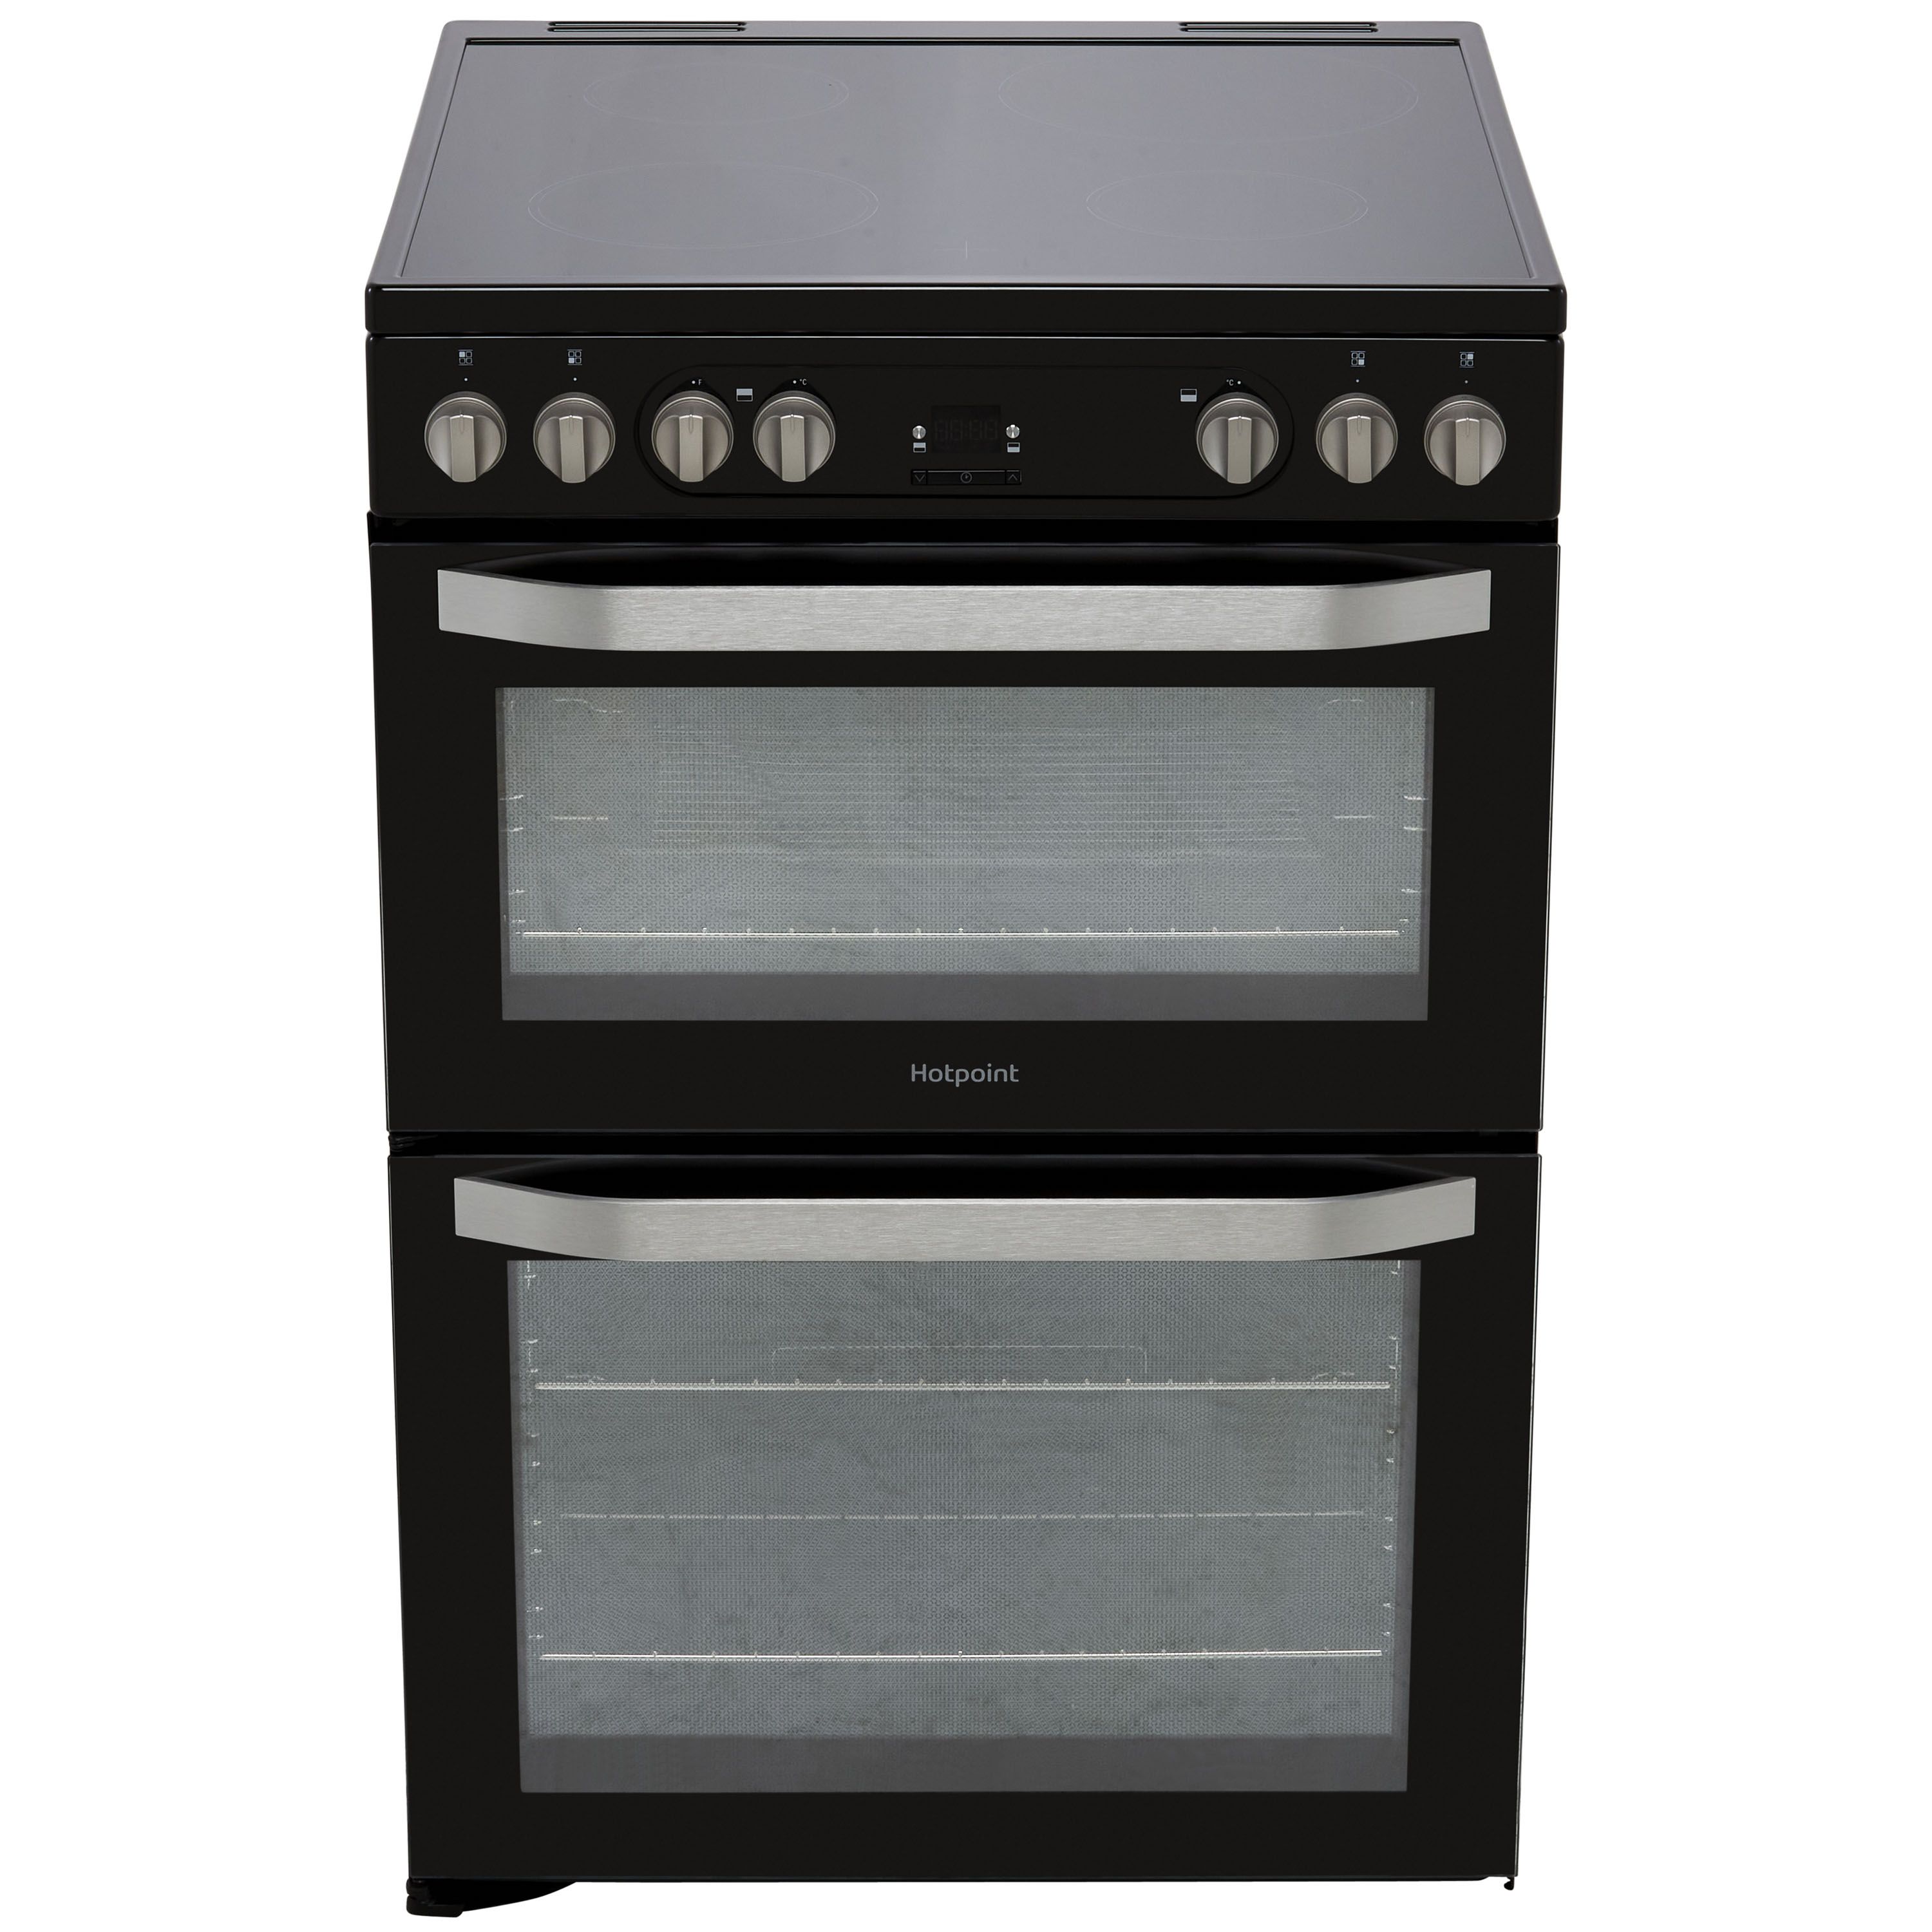 Hotpoint HDM67V9HCB/U_BK 60cm Double Electric Cooker with Ceramic Hob - Black